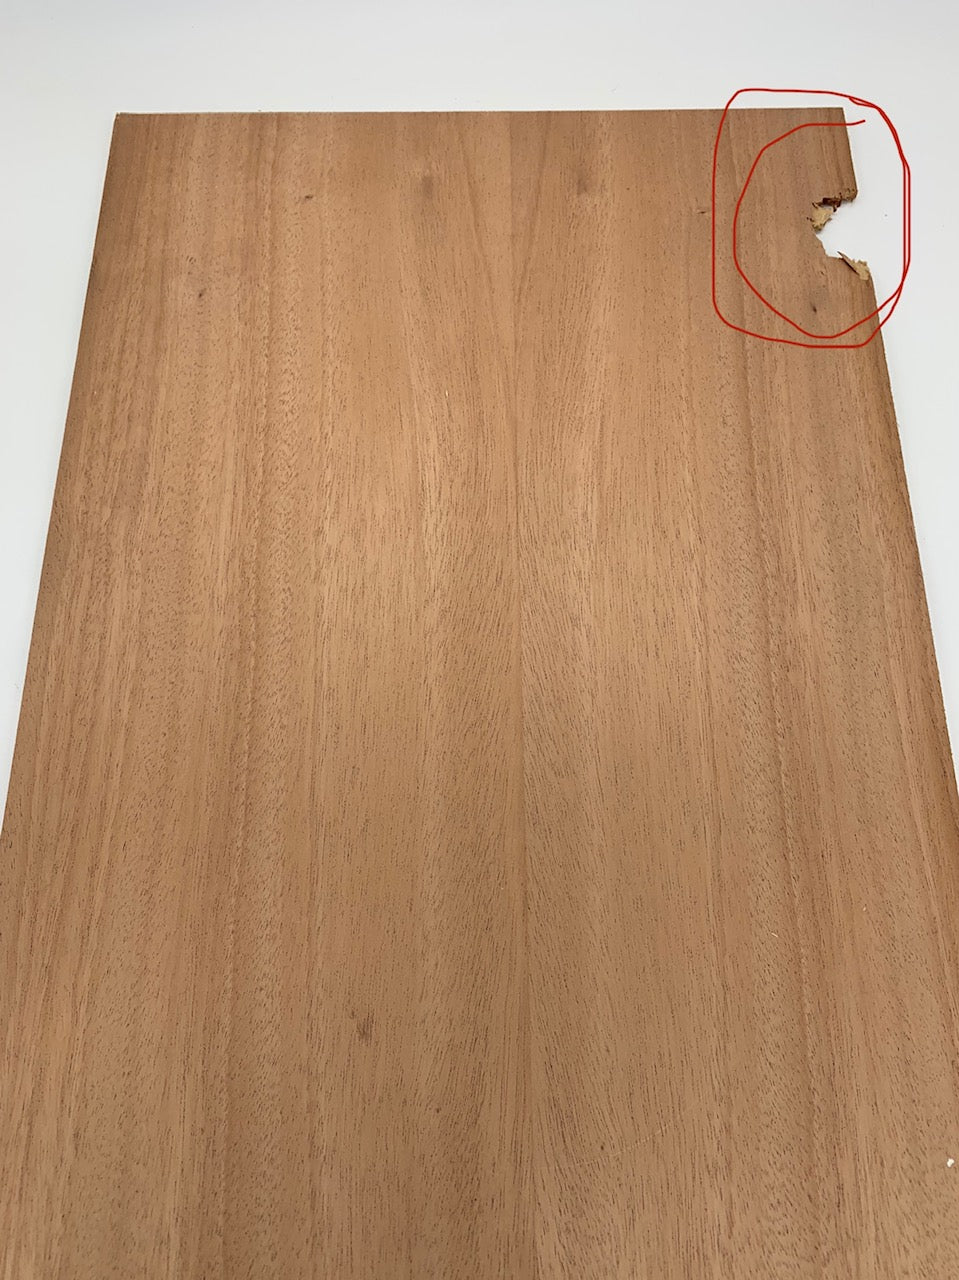 1/4 Beautiful Rejects, Wood, 30% off normal price.   PLEASE READ PRODUCT DESCRIPTION